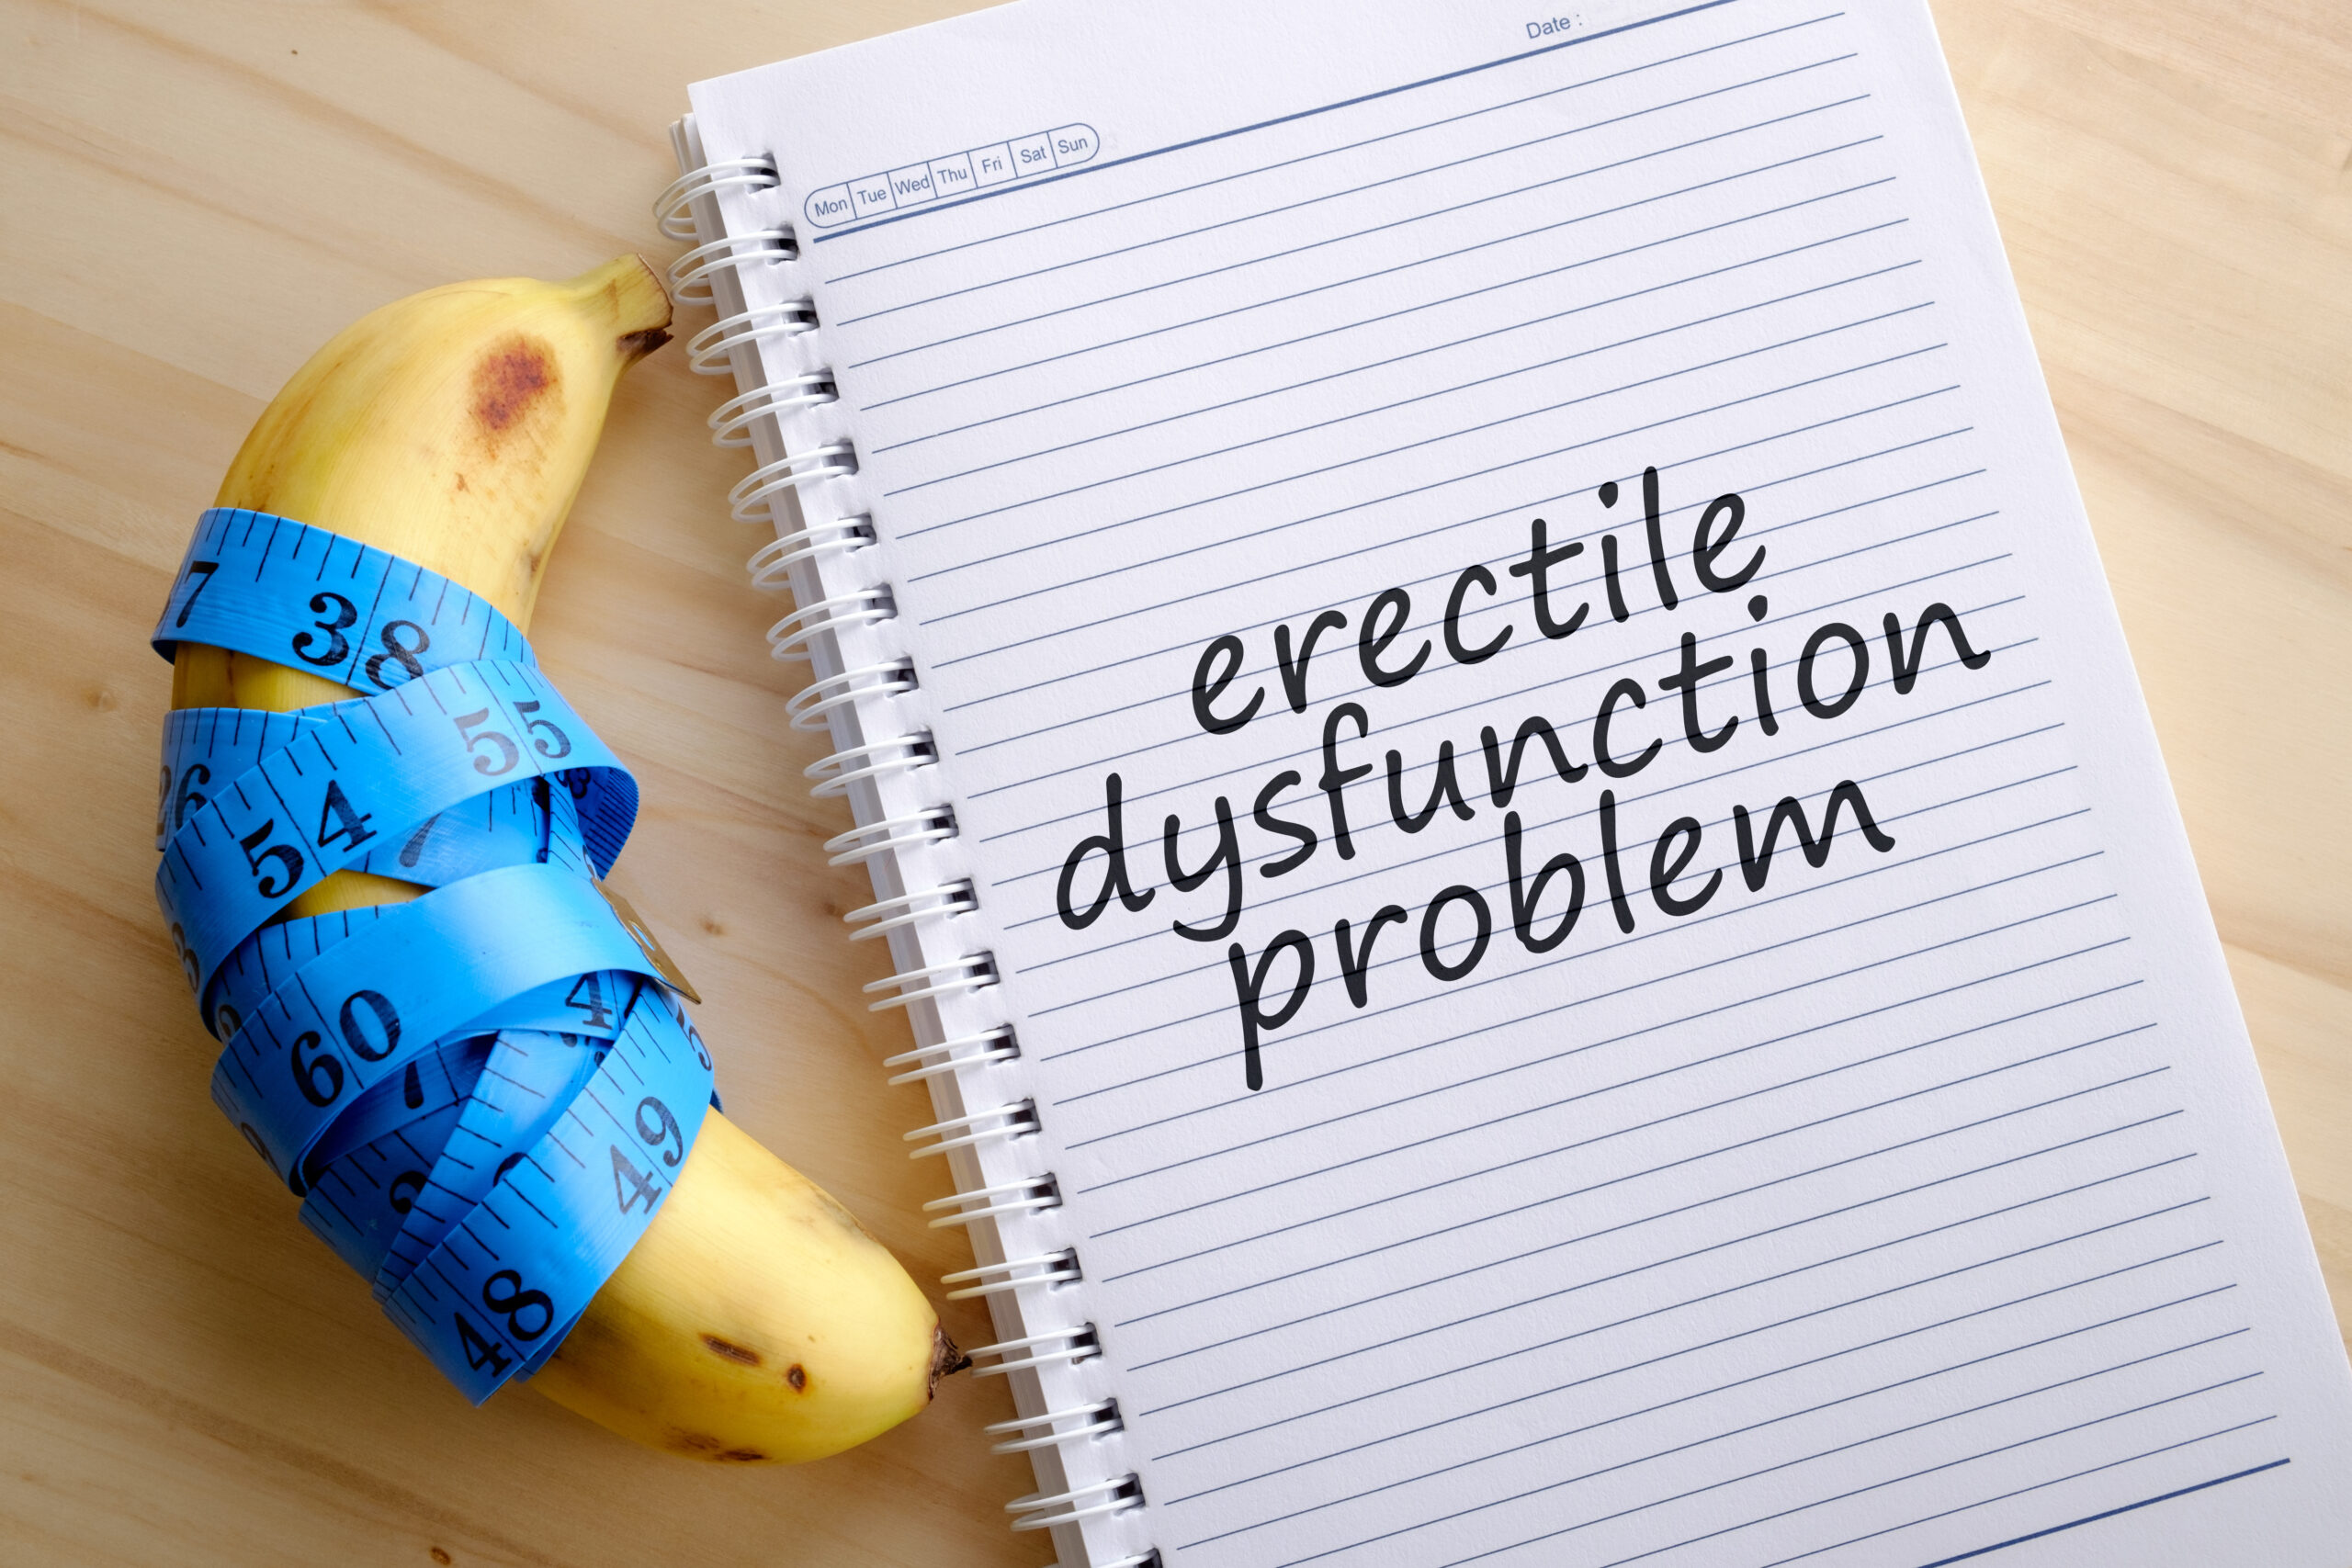 Erectile Dysfunction May Be An Early Sign Of CVD